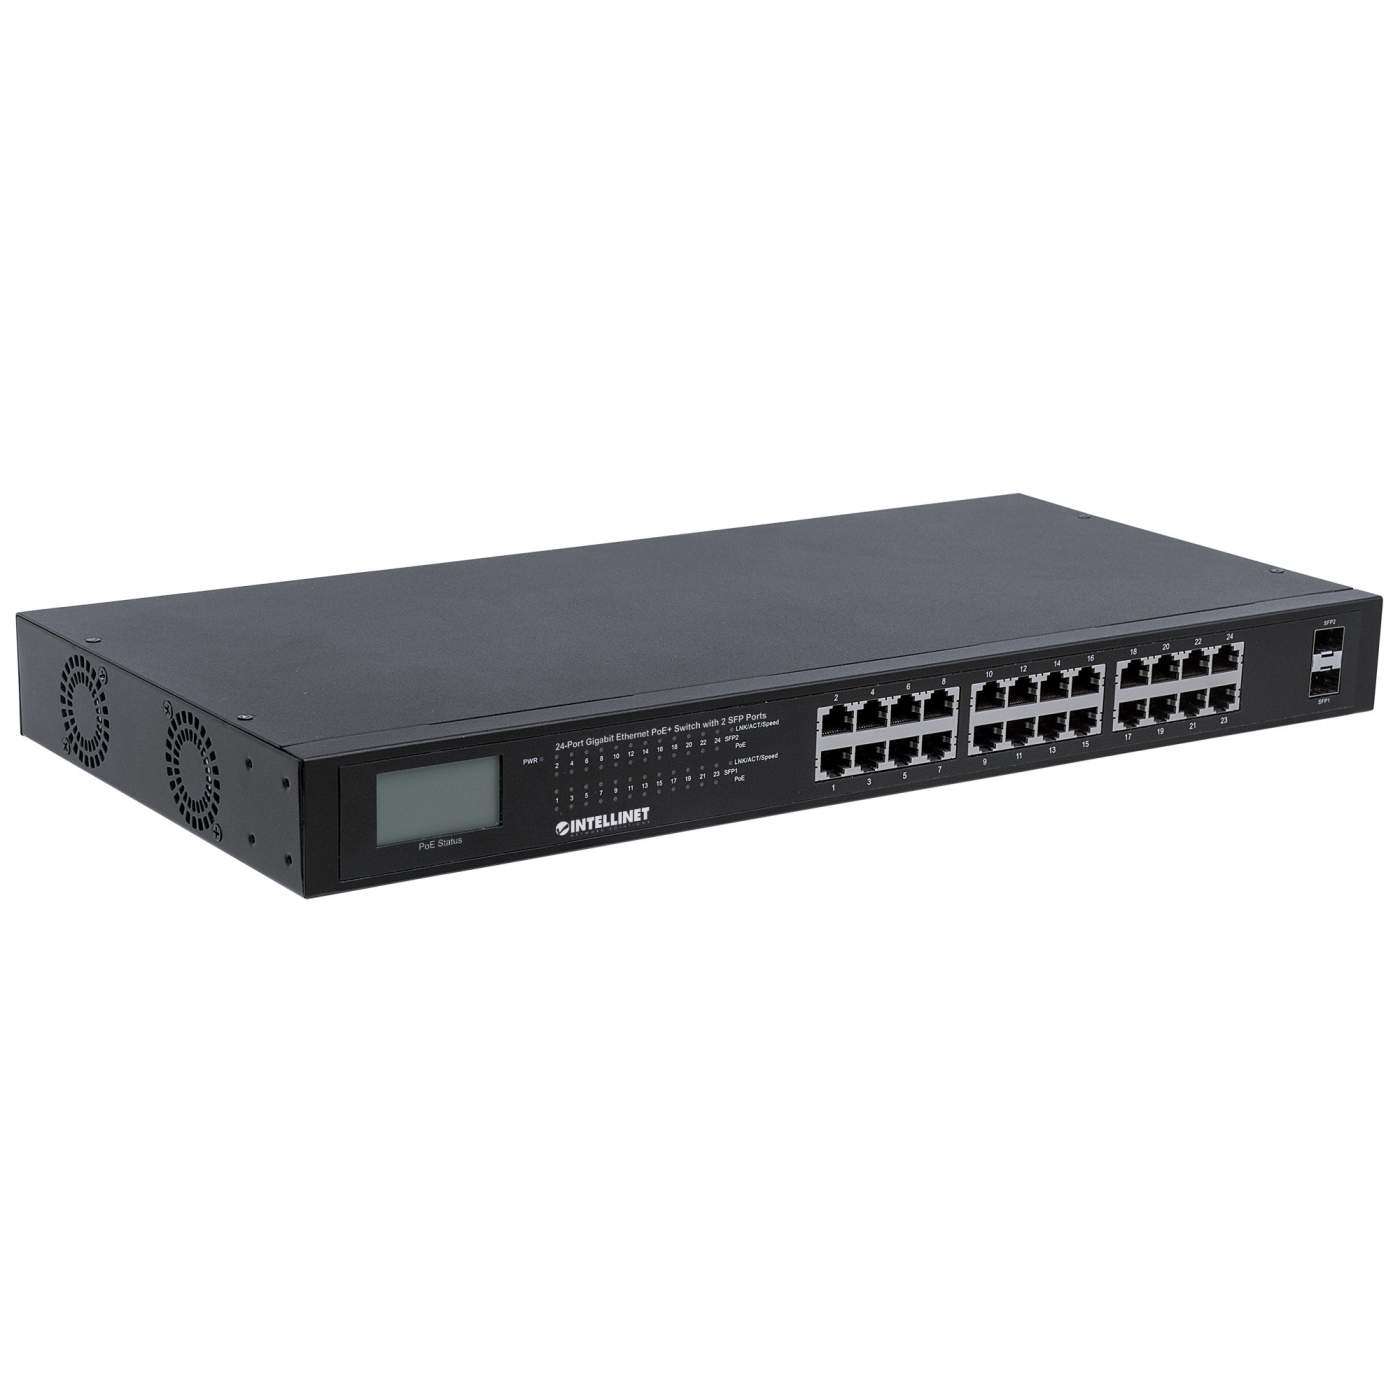 24-Port Gigabit Ethernet PoE+ Switch with 2 SFP Ports and LCD Screen Image 2